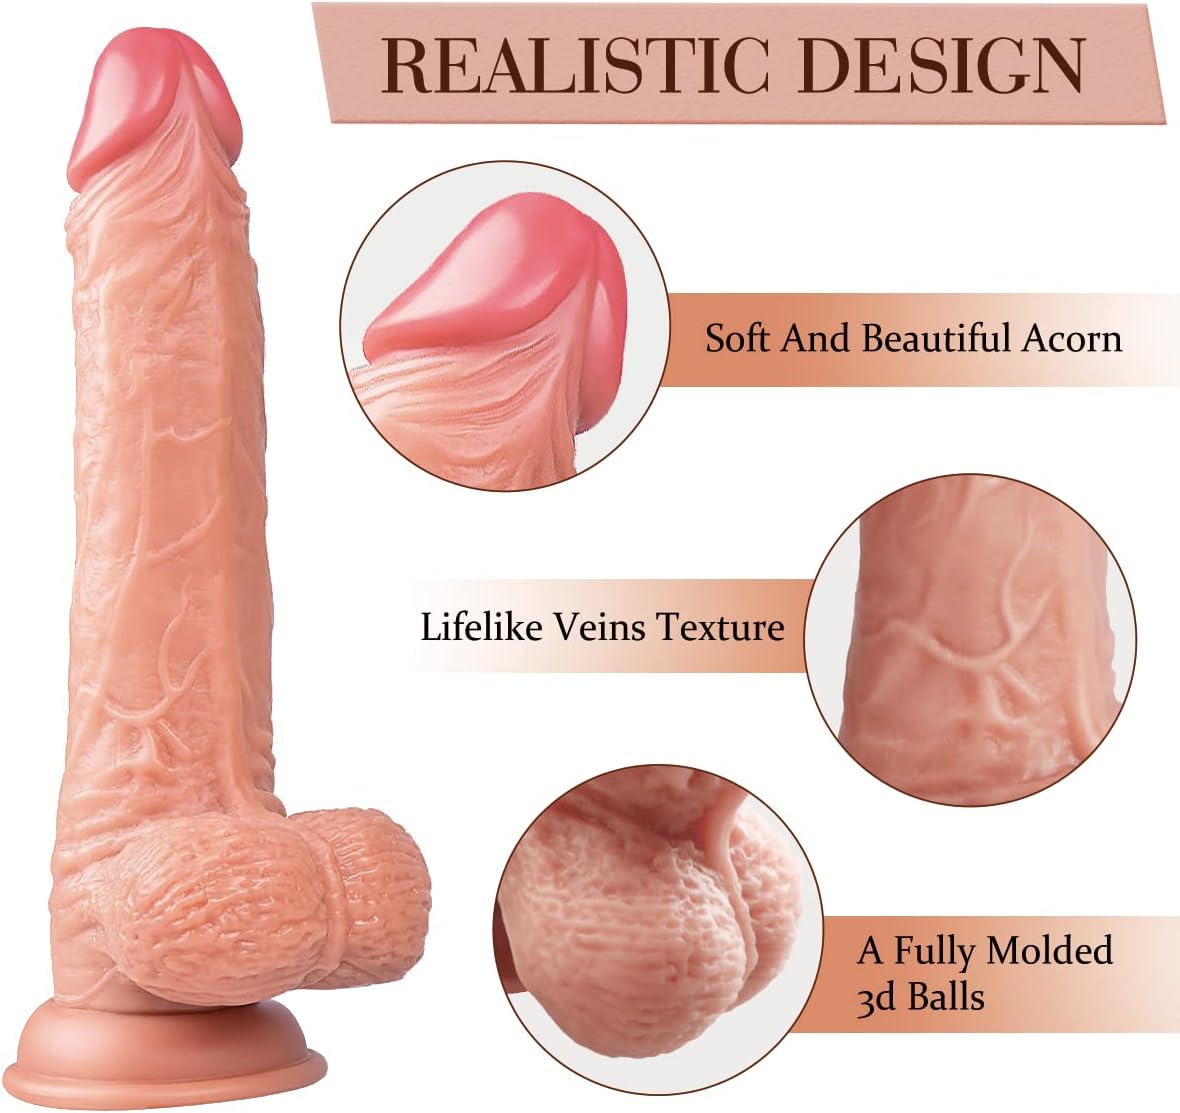 9 Inch Realistic Dildo Adult Sex Toys, Body-Safe Material Lifelike Huge Penis with Strong Suction Cup for Hands-Free Play, Flexible Cock with Curved Shaft and Balls for Vaginal G-spot and Anal Play